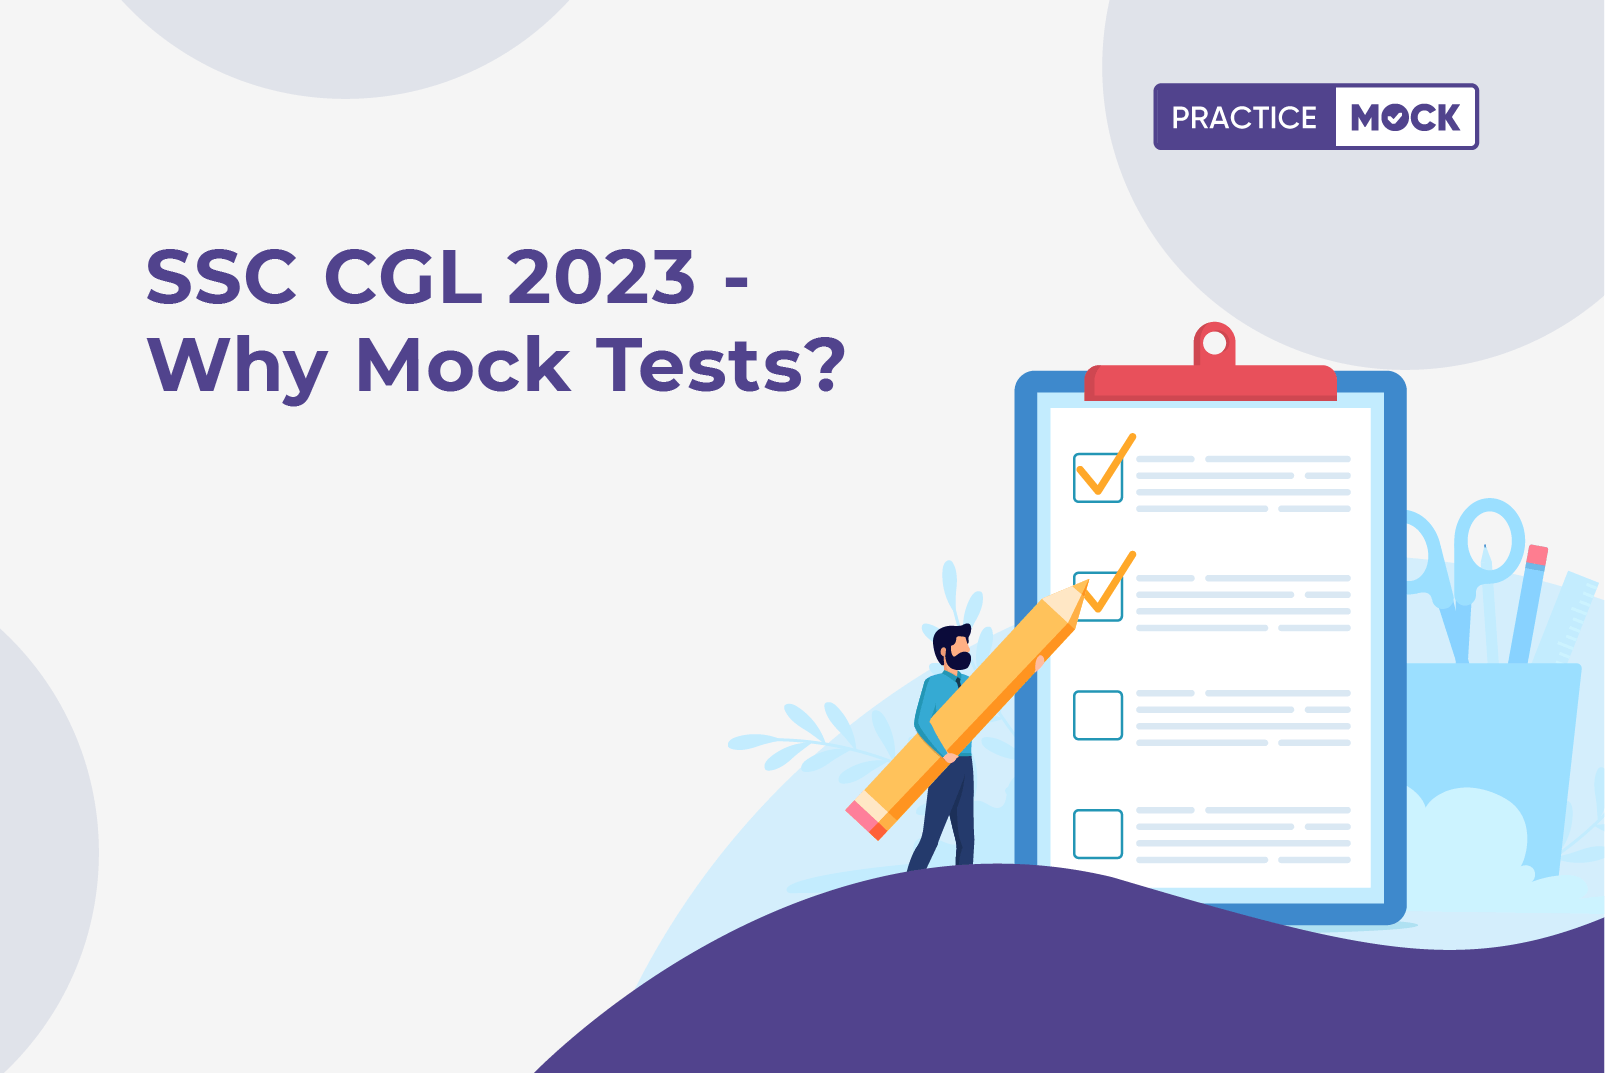 SSC CGL 2023 - Why Mock Tests?